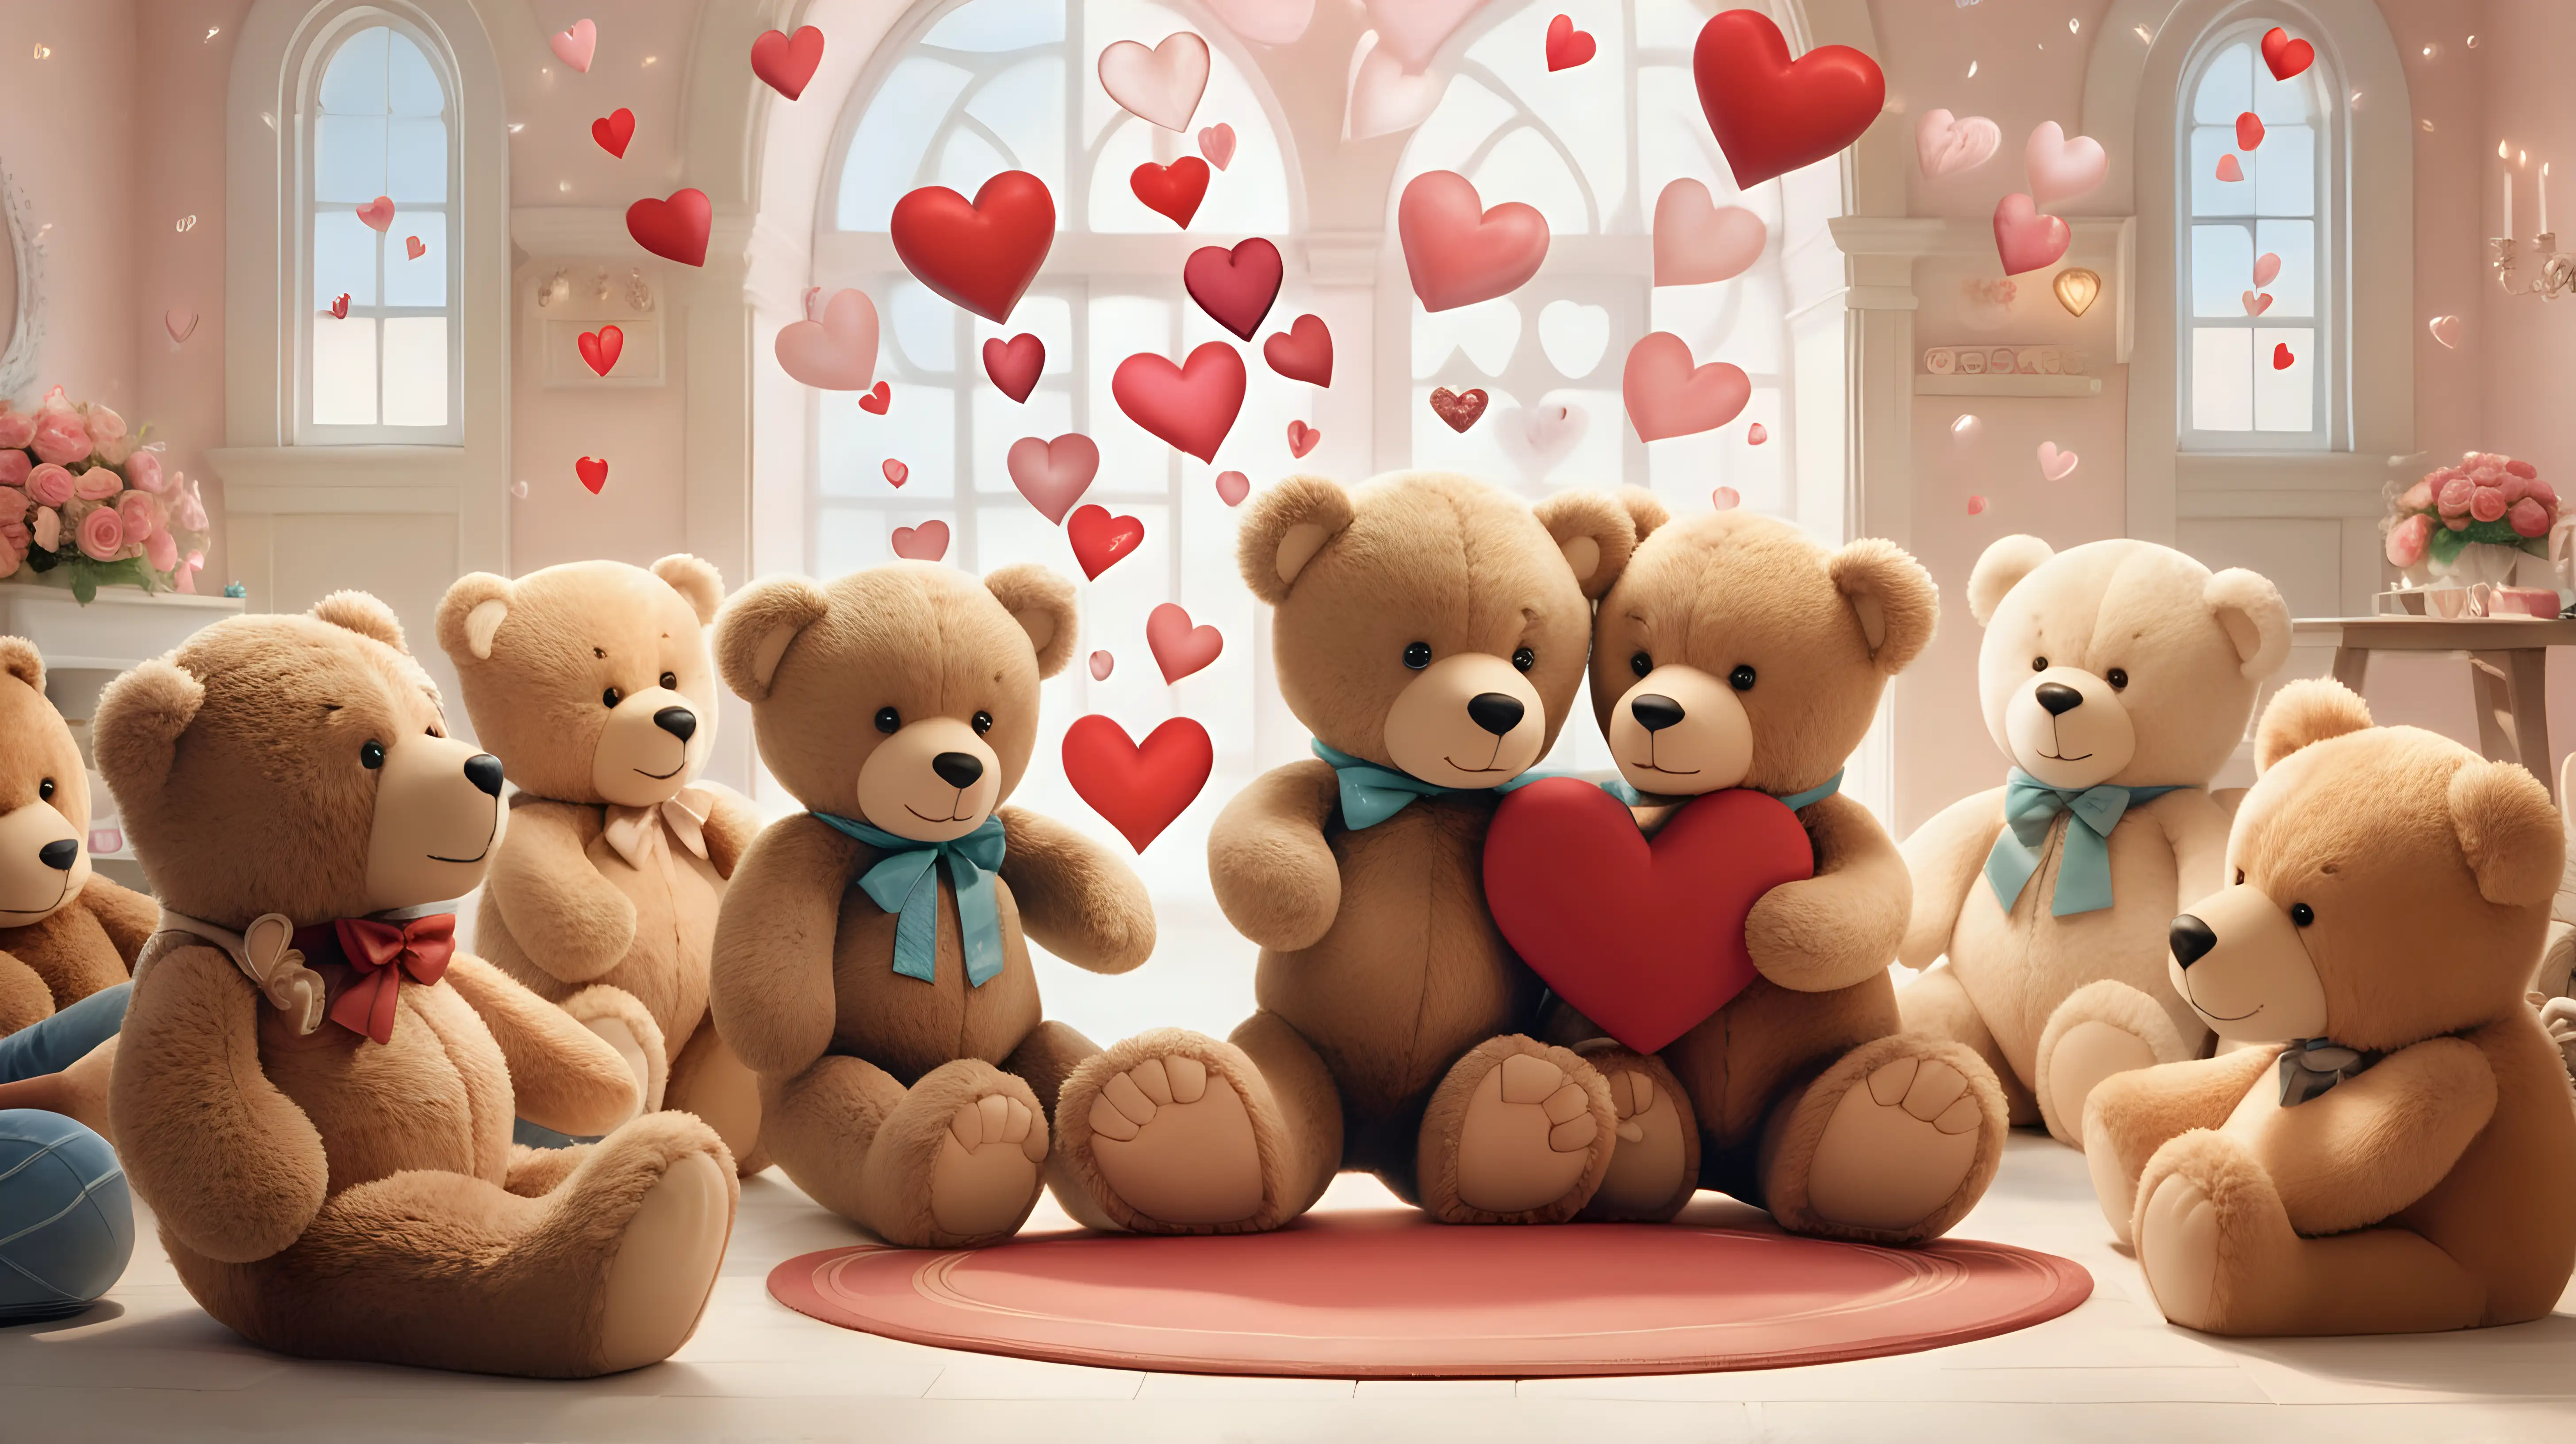 Lovefilled Hearts and Cuddly Teddy Bears Surrounding a Blank Space